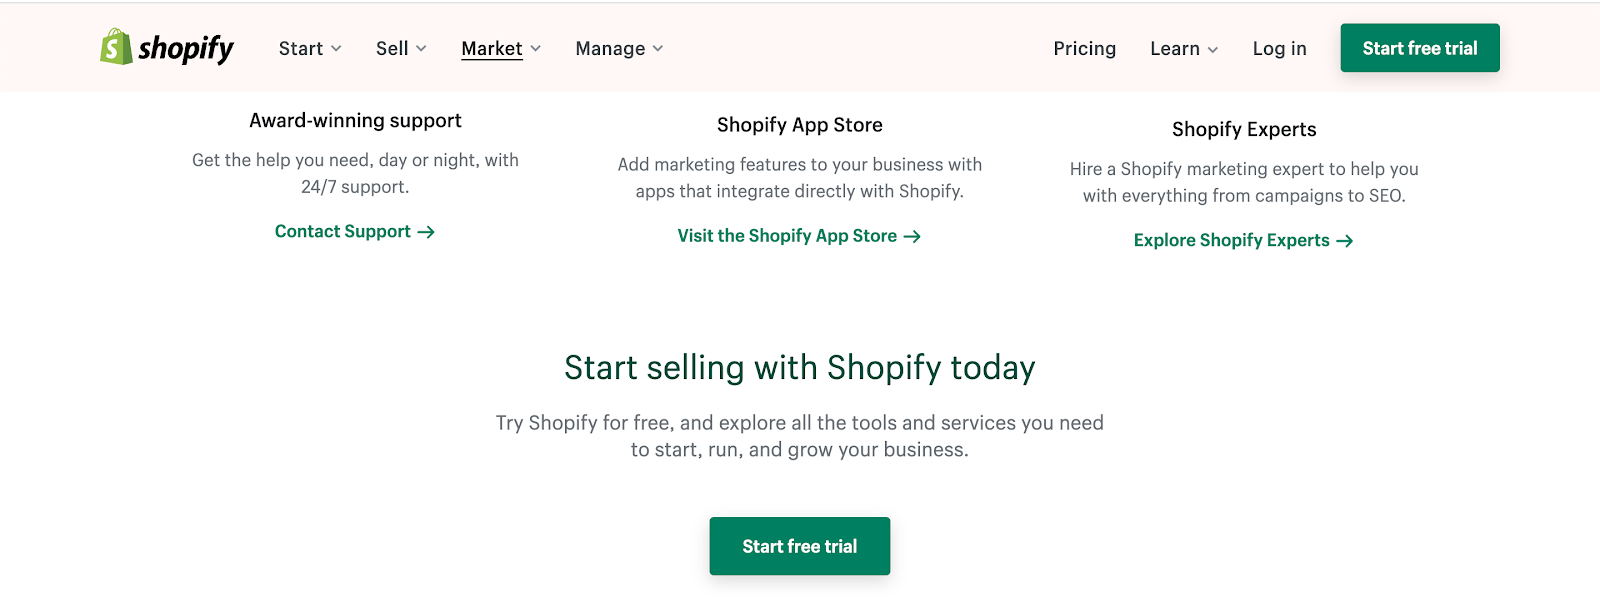 Final Thoughts: Why You Should Choose Shopify For Your Ecommerce Business?